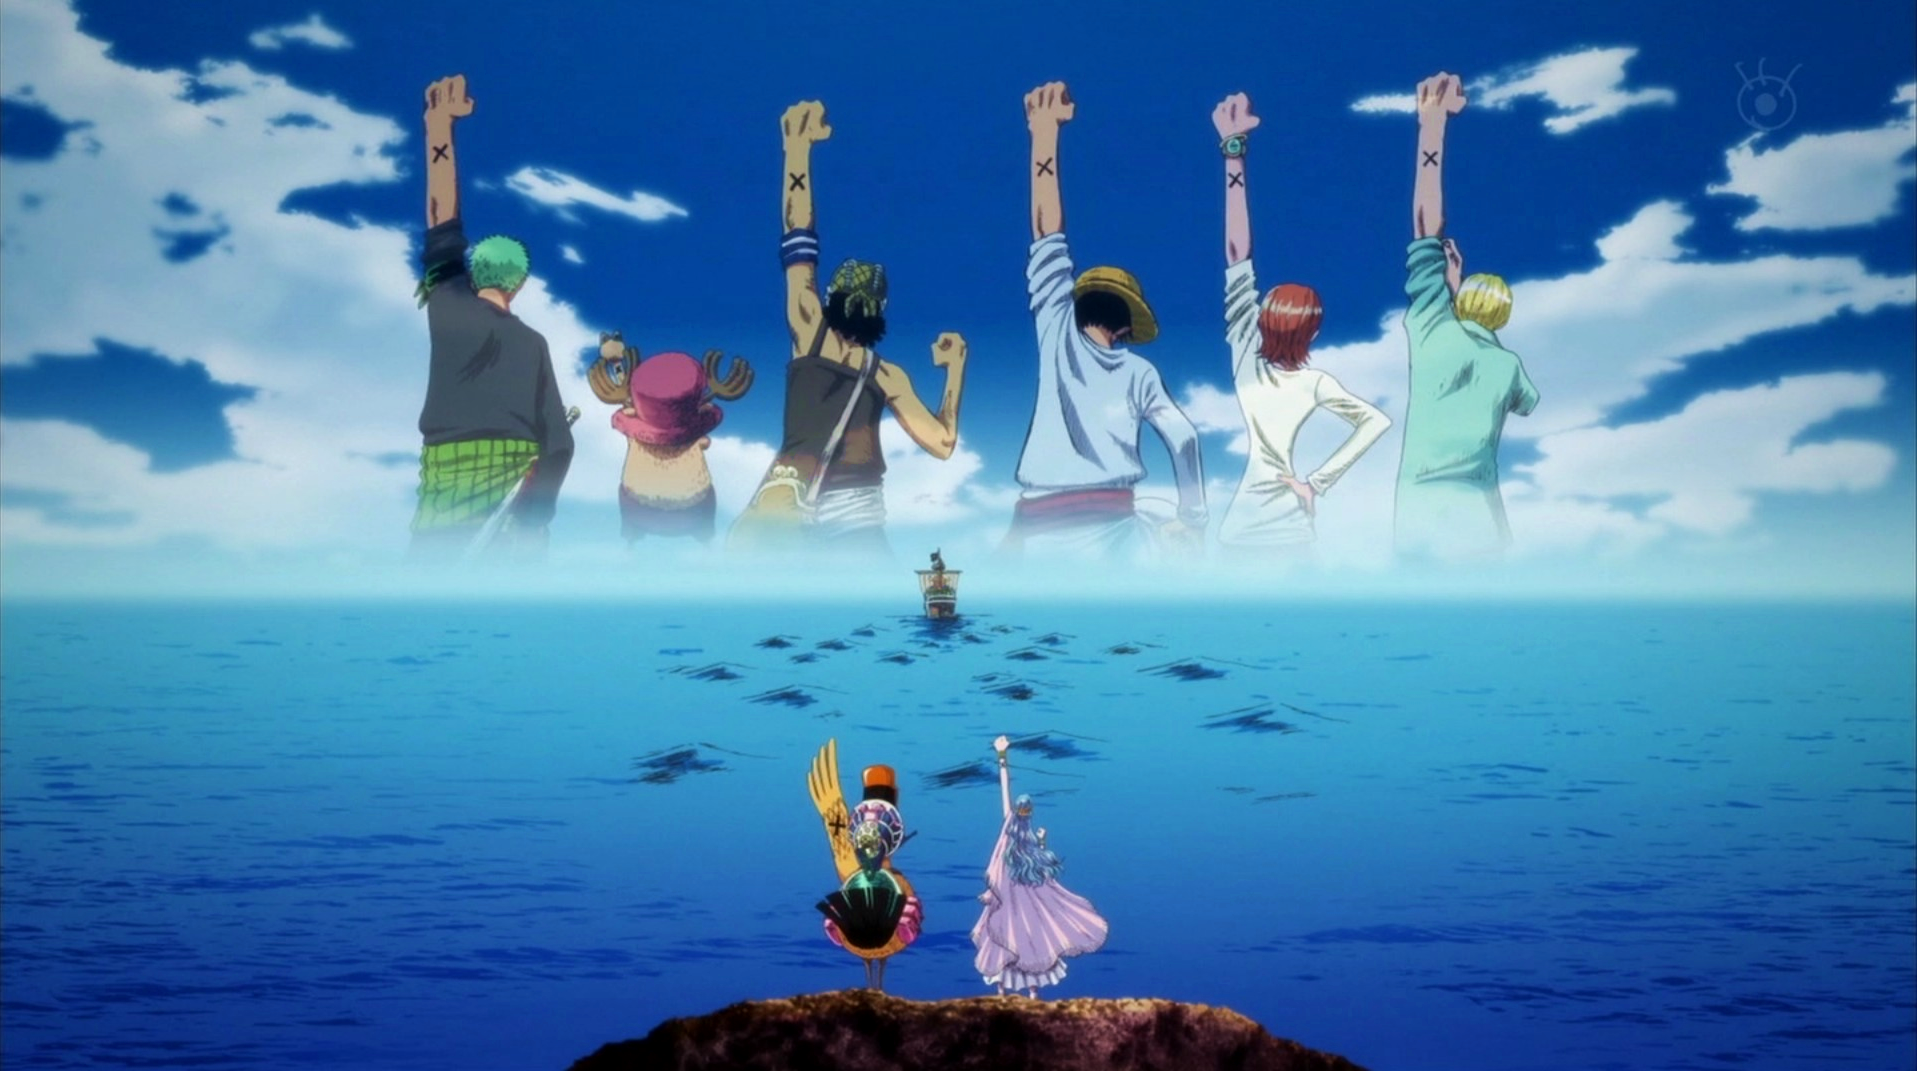 En Que Capitulo Cambian El Going Merry Monkey D. Luffy/Historia/Paradise | One Piece Wiki | Fandom